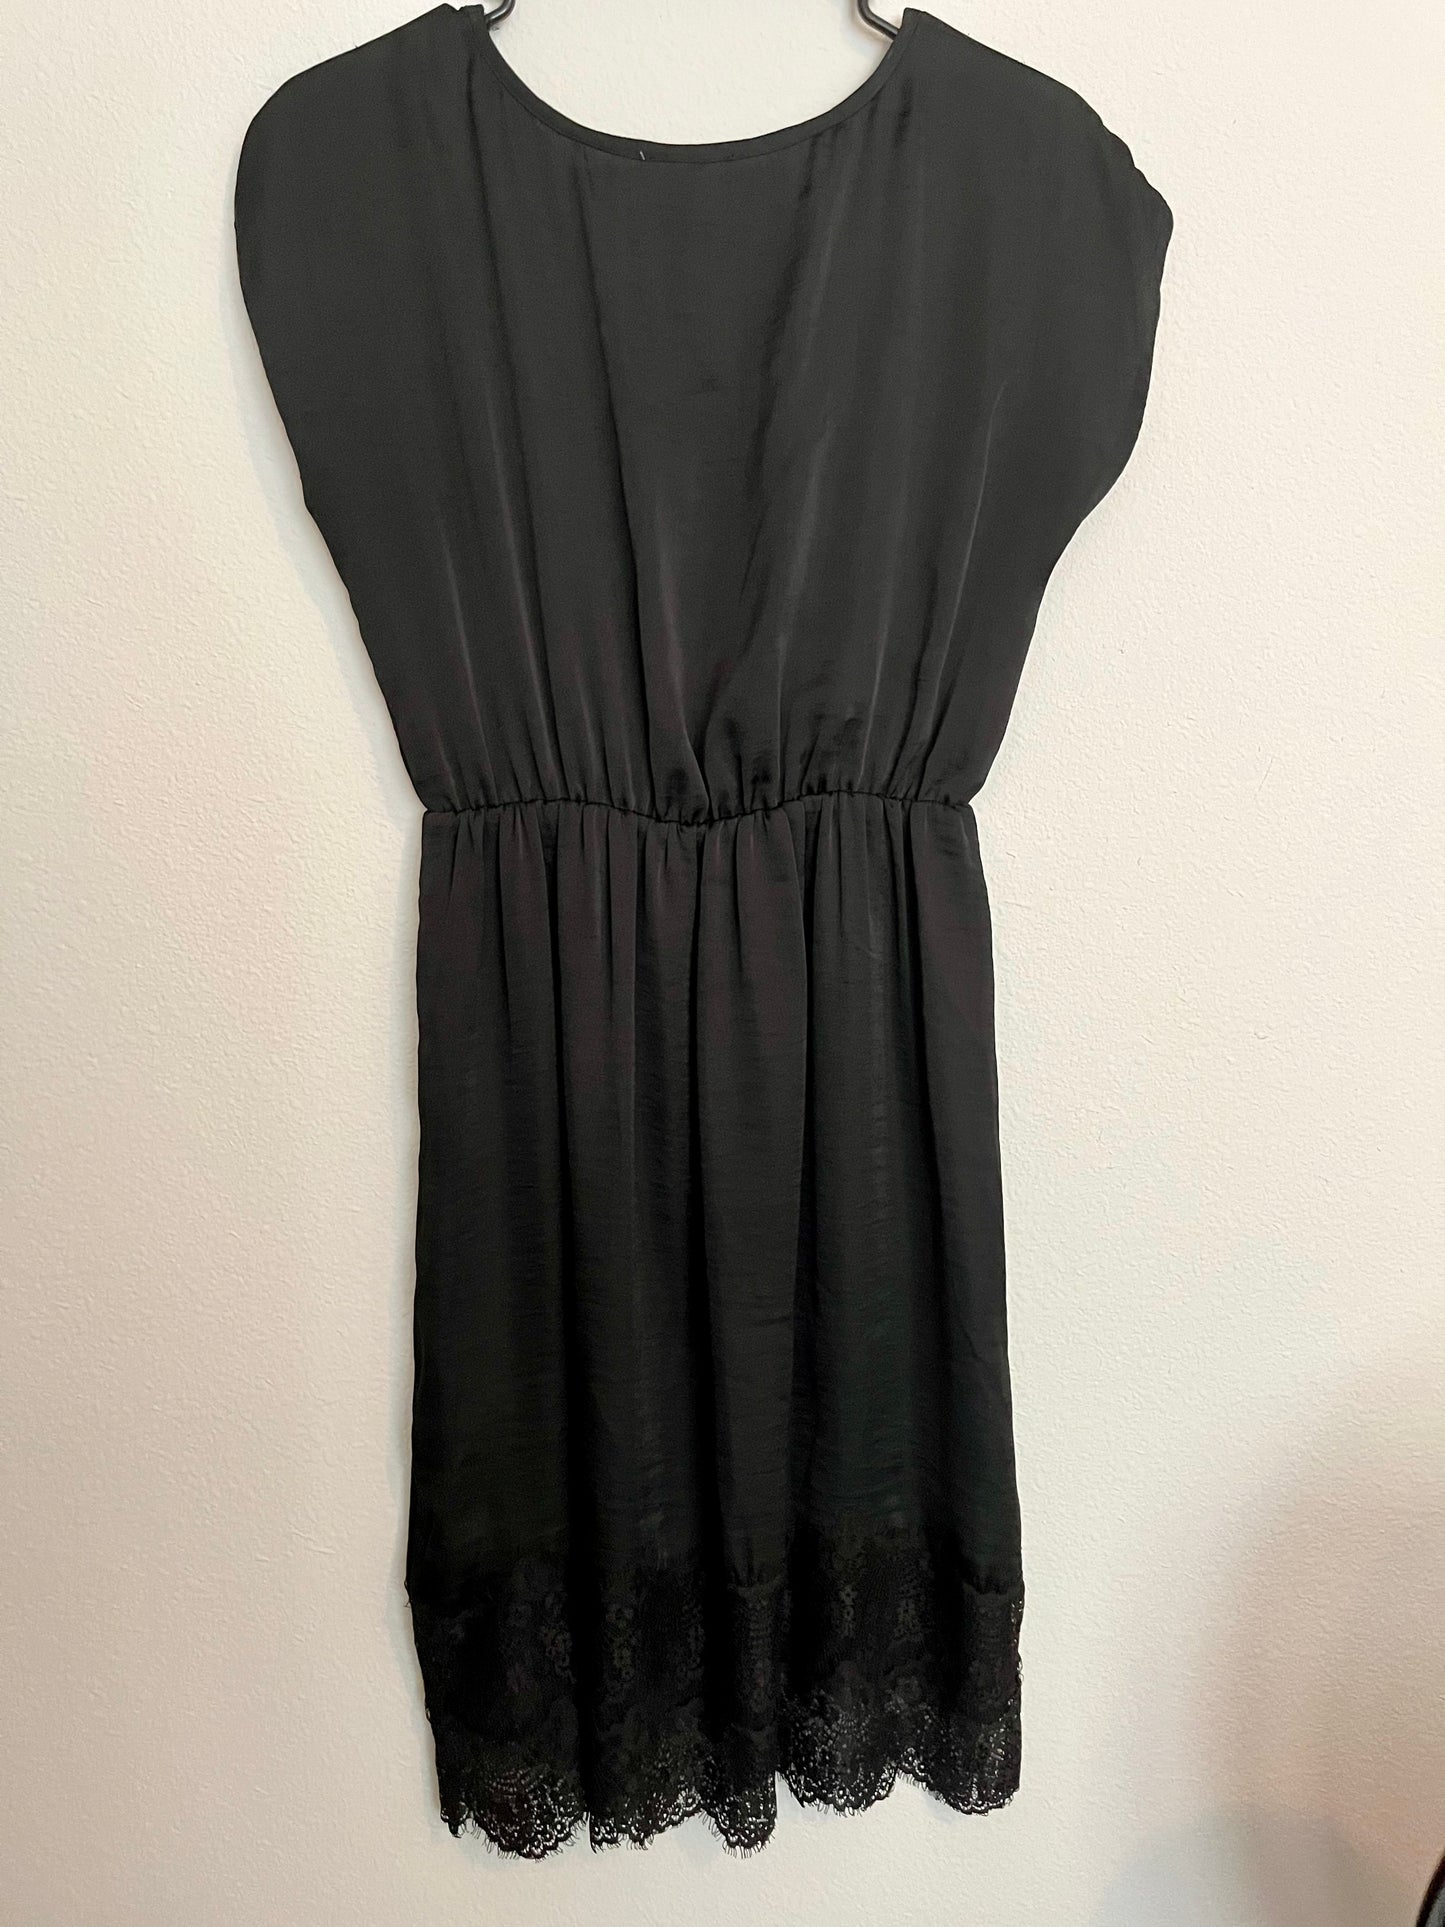 A Pea in the Pod Black Lace Sundress- Size Small